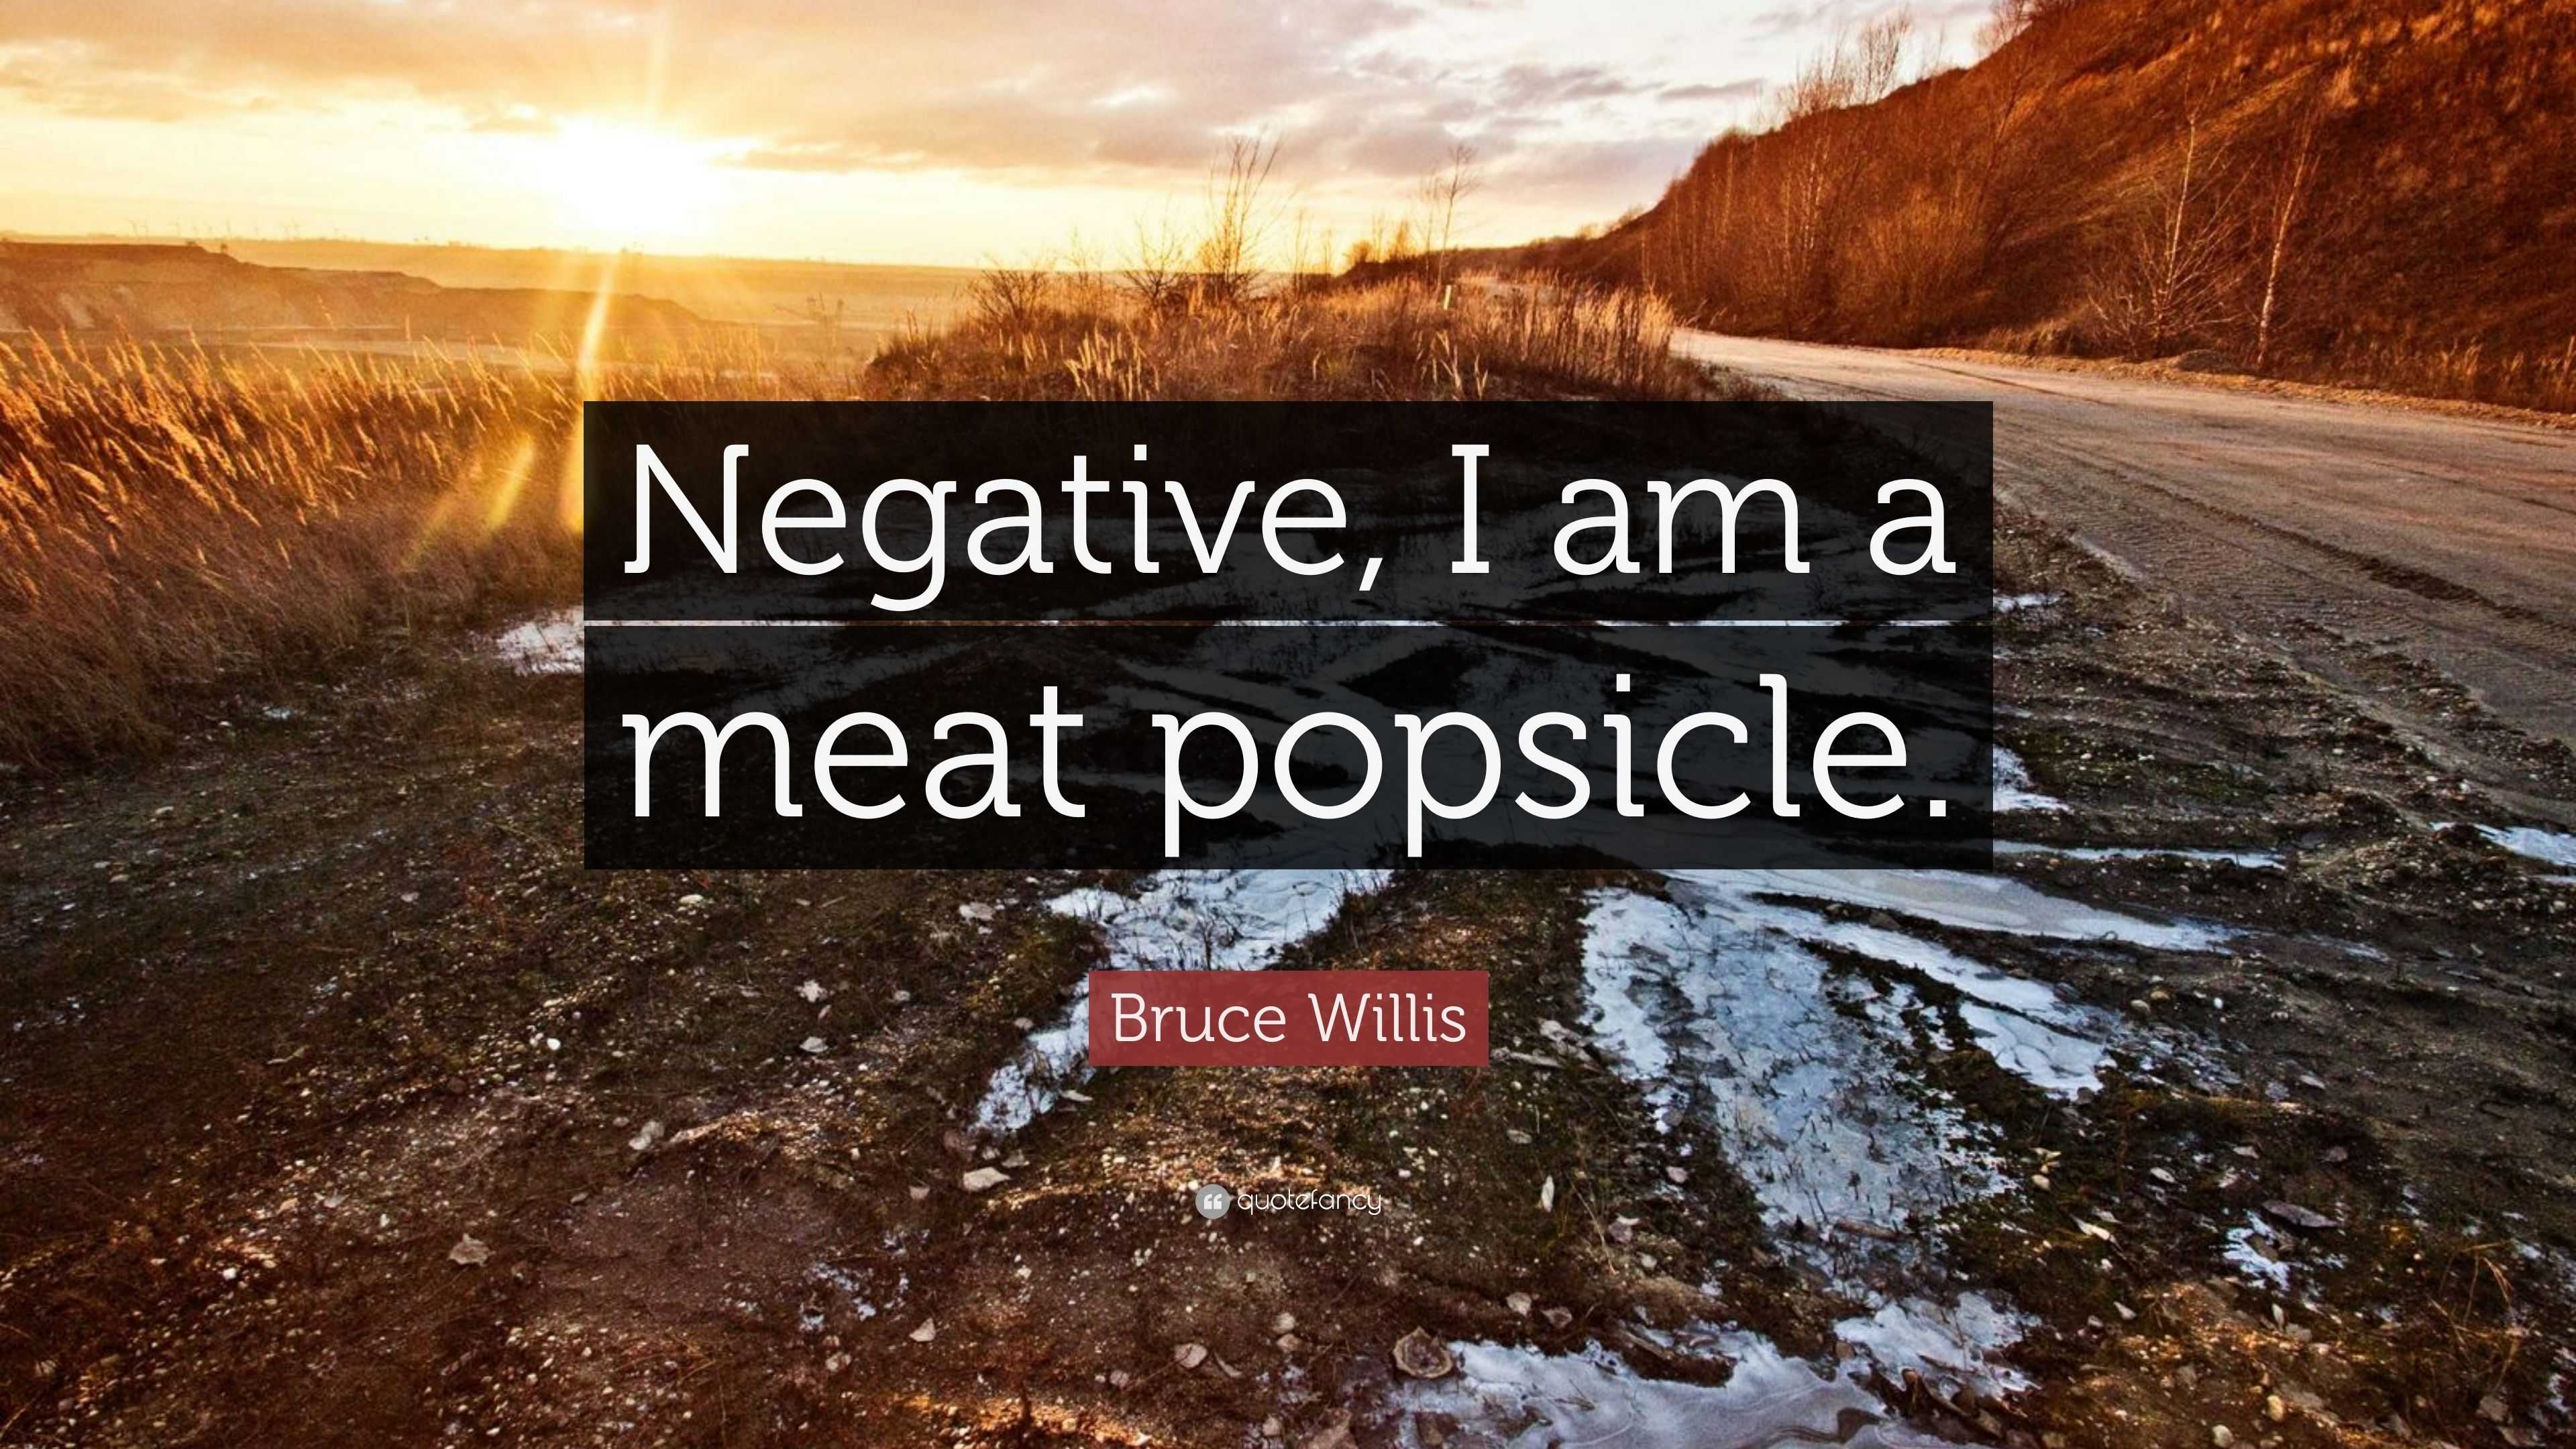 Bruce Willis Quote: "Negative, I am a meat popsicle." (9 ...